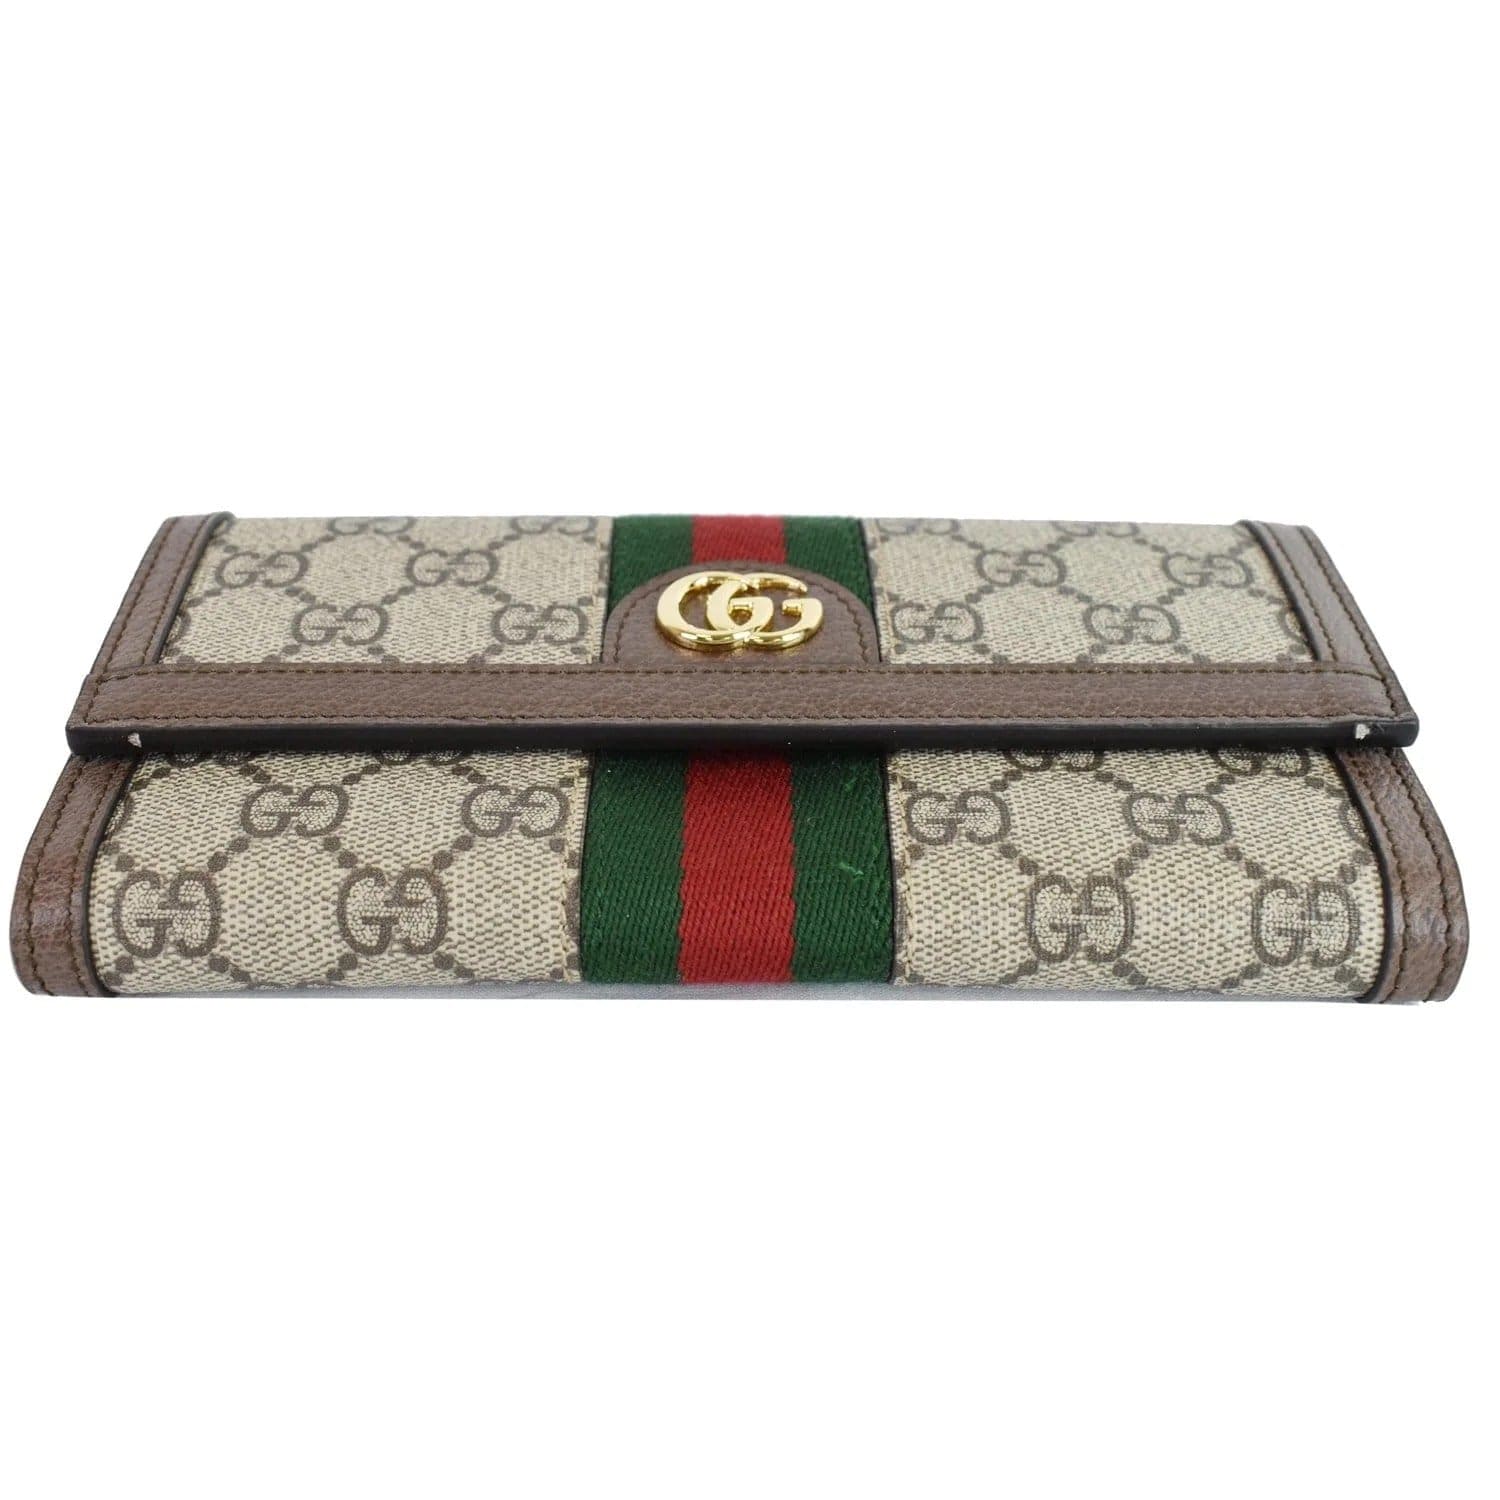 GG Marmont continental wallet in beige/ebony GG Supreme